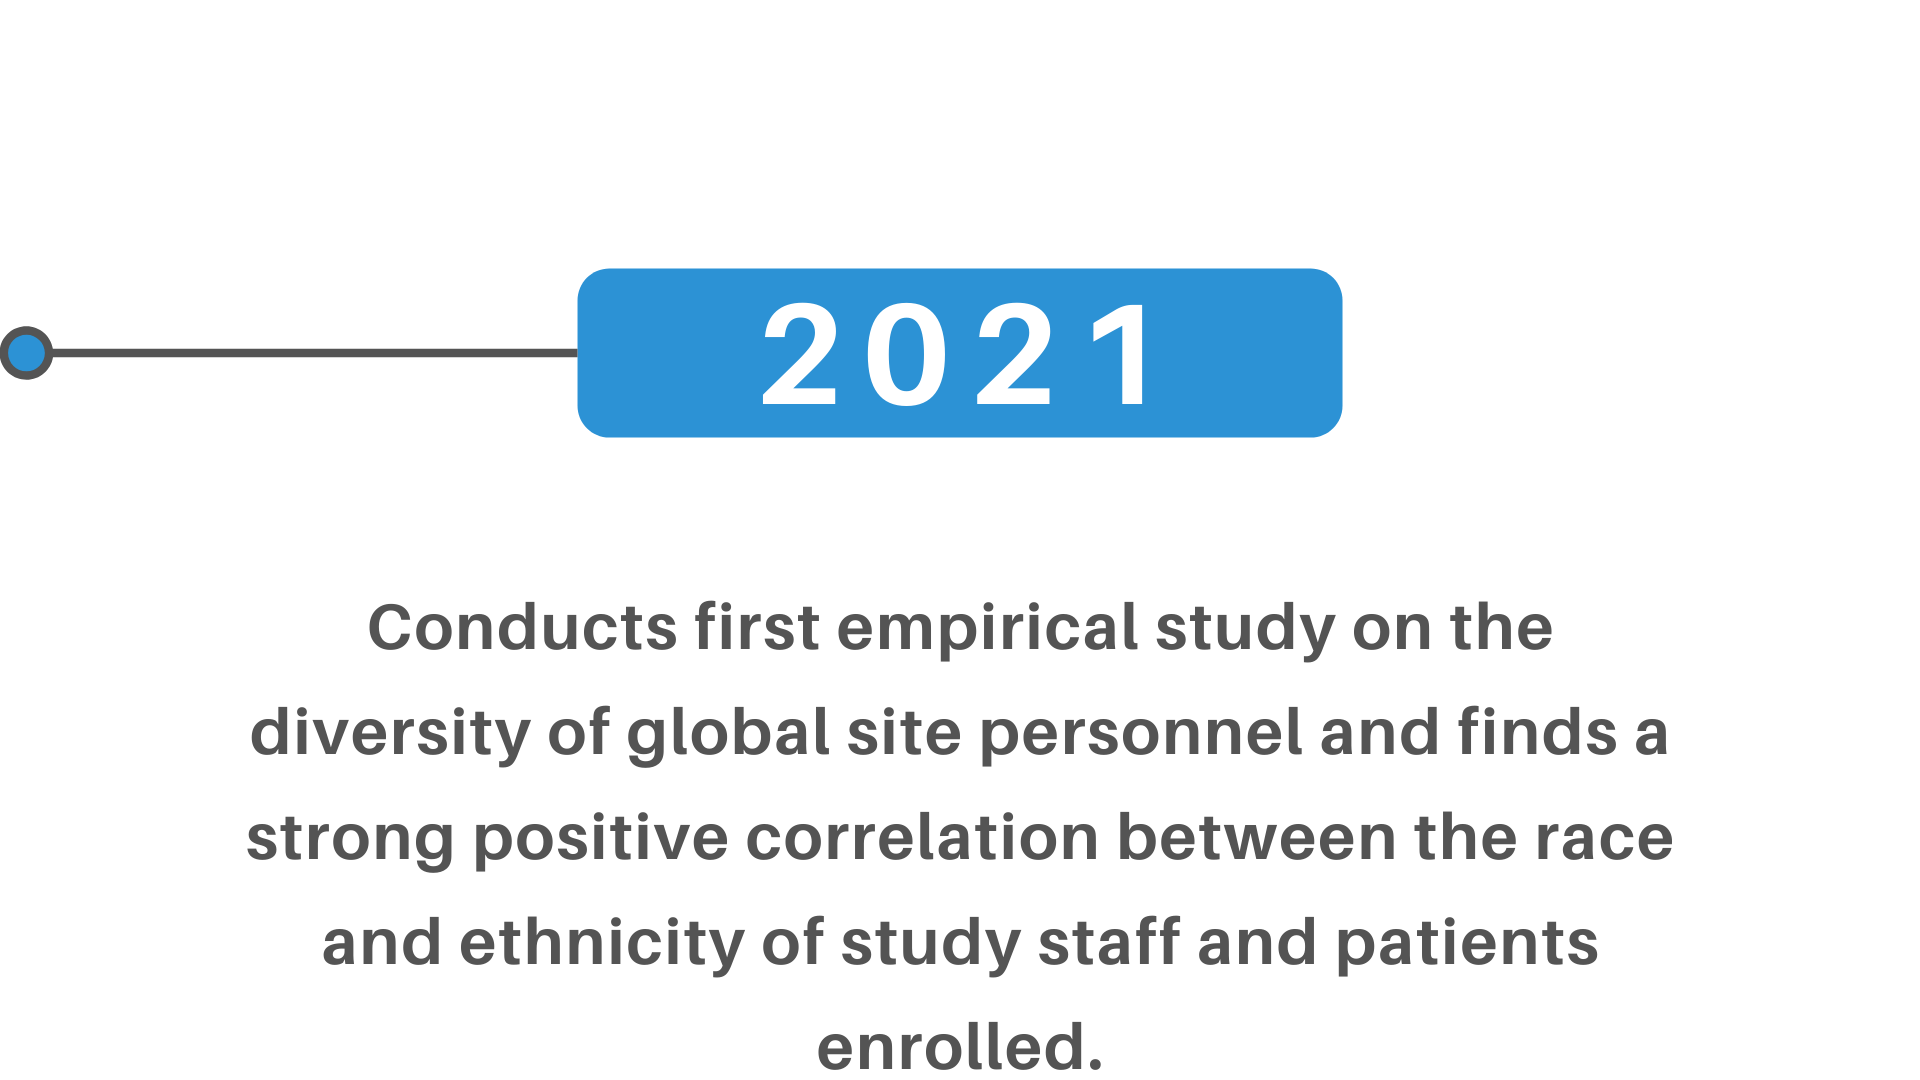 Conducts first empirical study on the diversity of global site personnel and finds a strong positive correlation between the race and ethnicity of study staff and patients enrolled